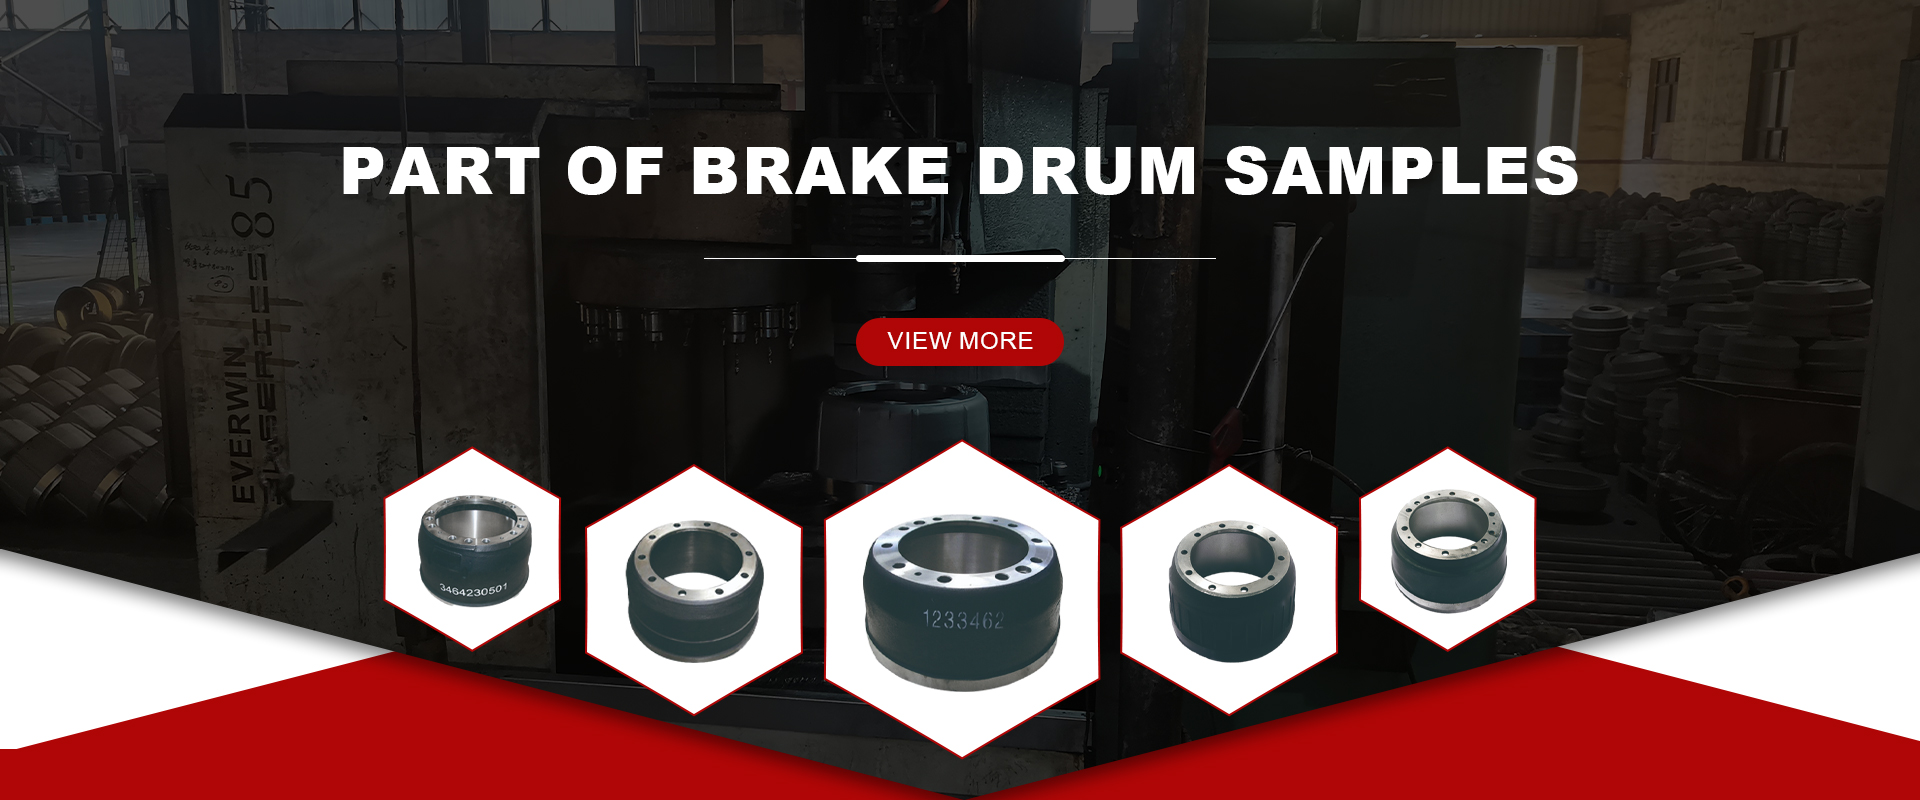 Read More About electric drum brakes